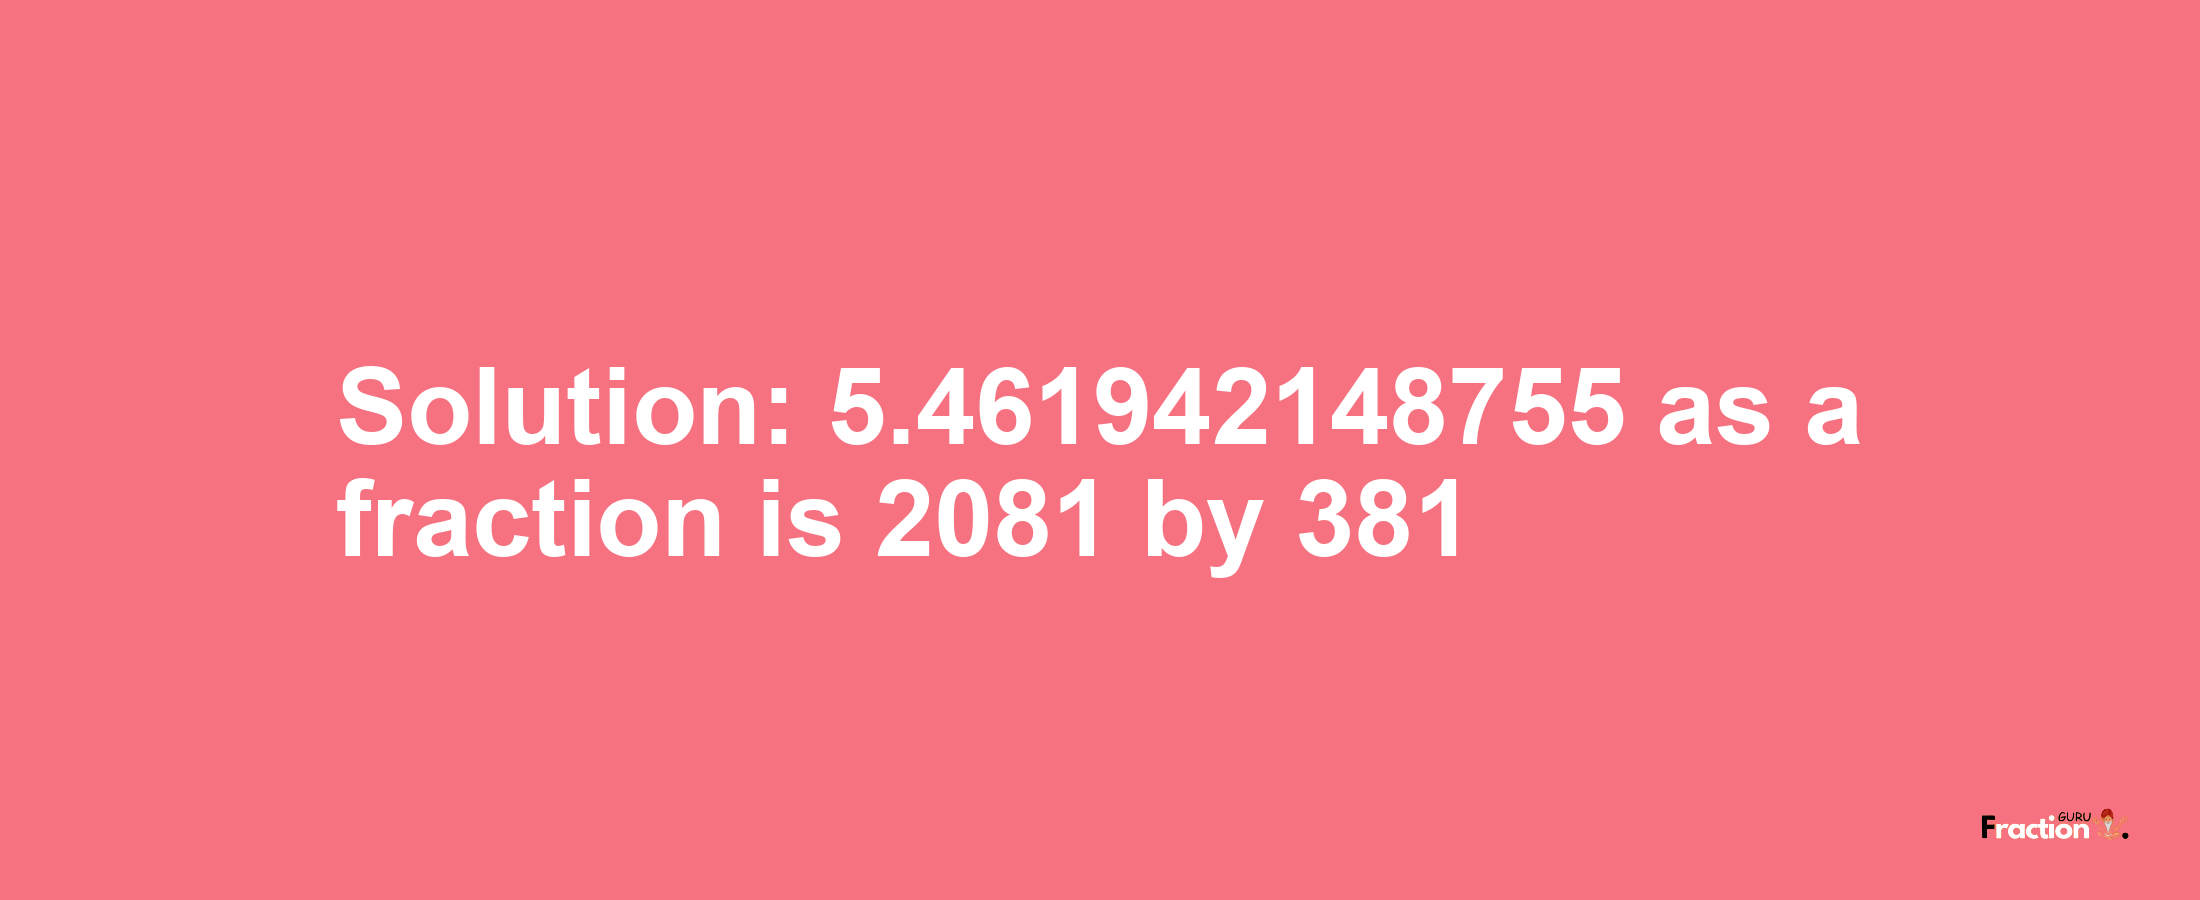 Solution:5.461942148755 as a fraction is 2081/381